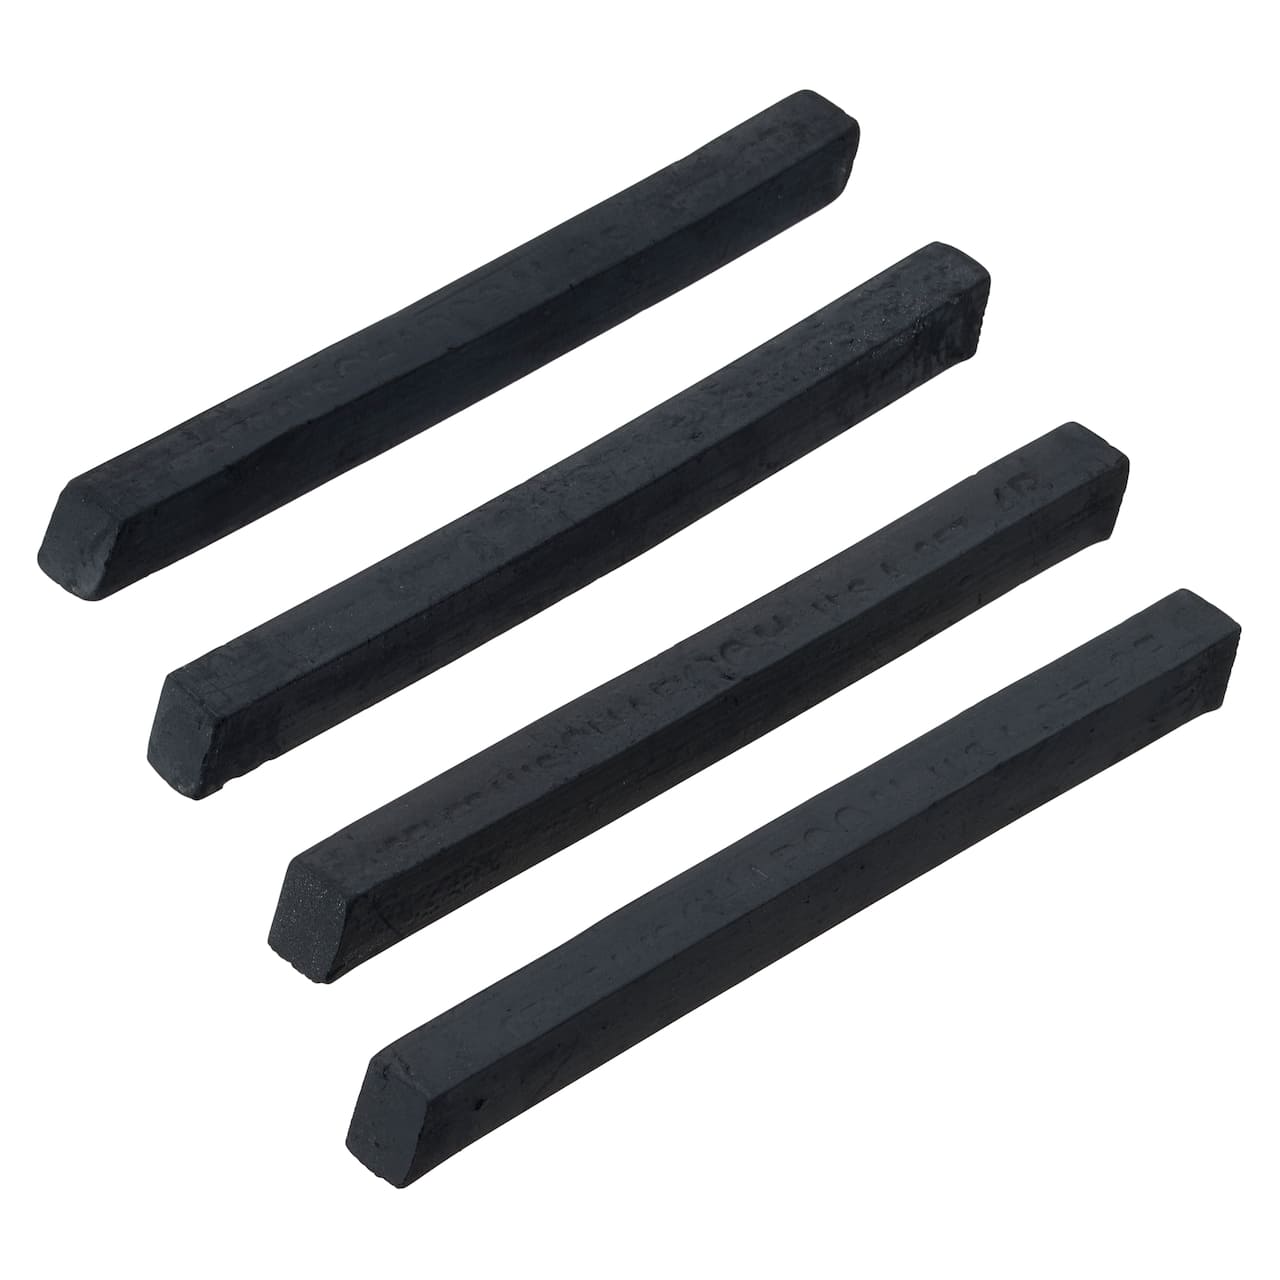 General's® Compressed Charcoal Sticks